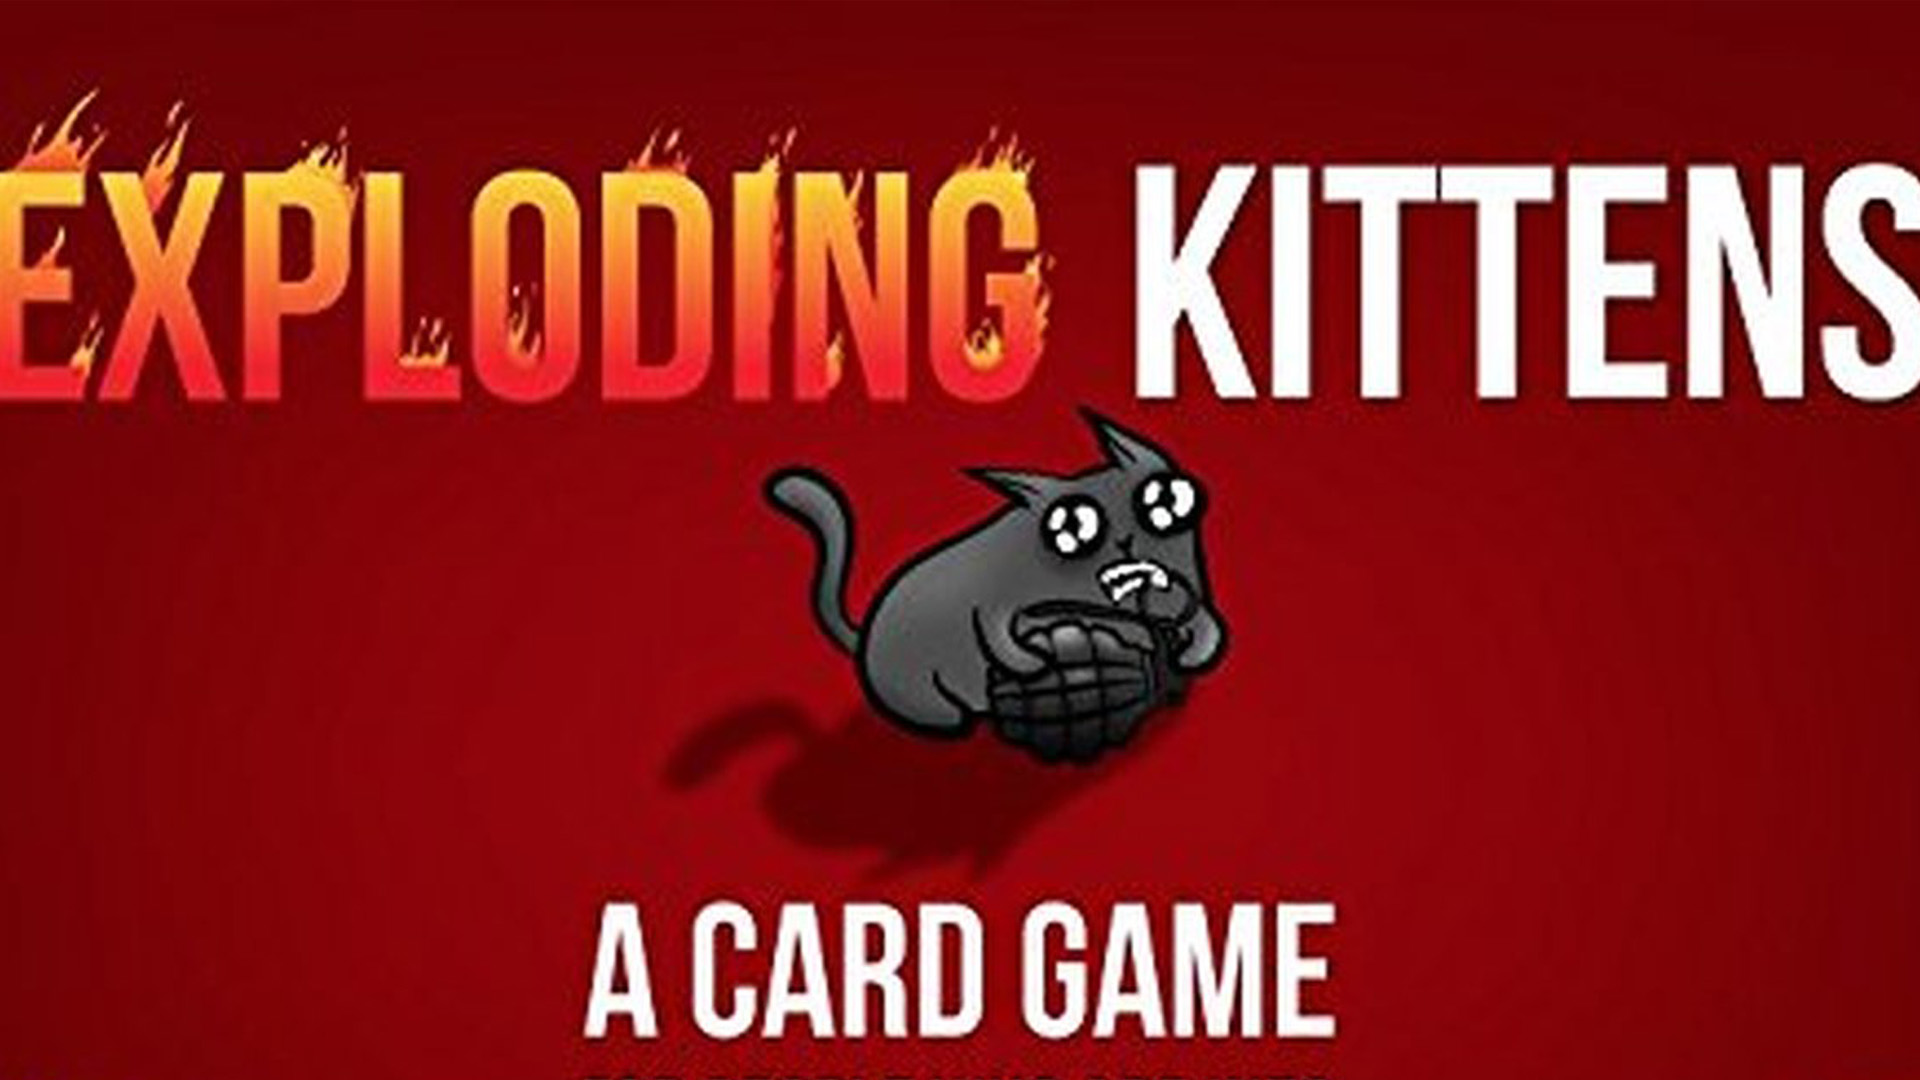 how to win exploding kittens